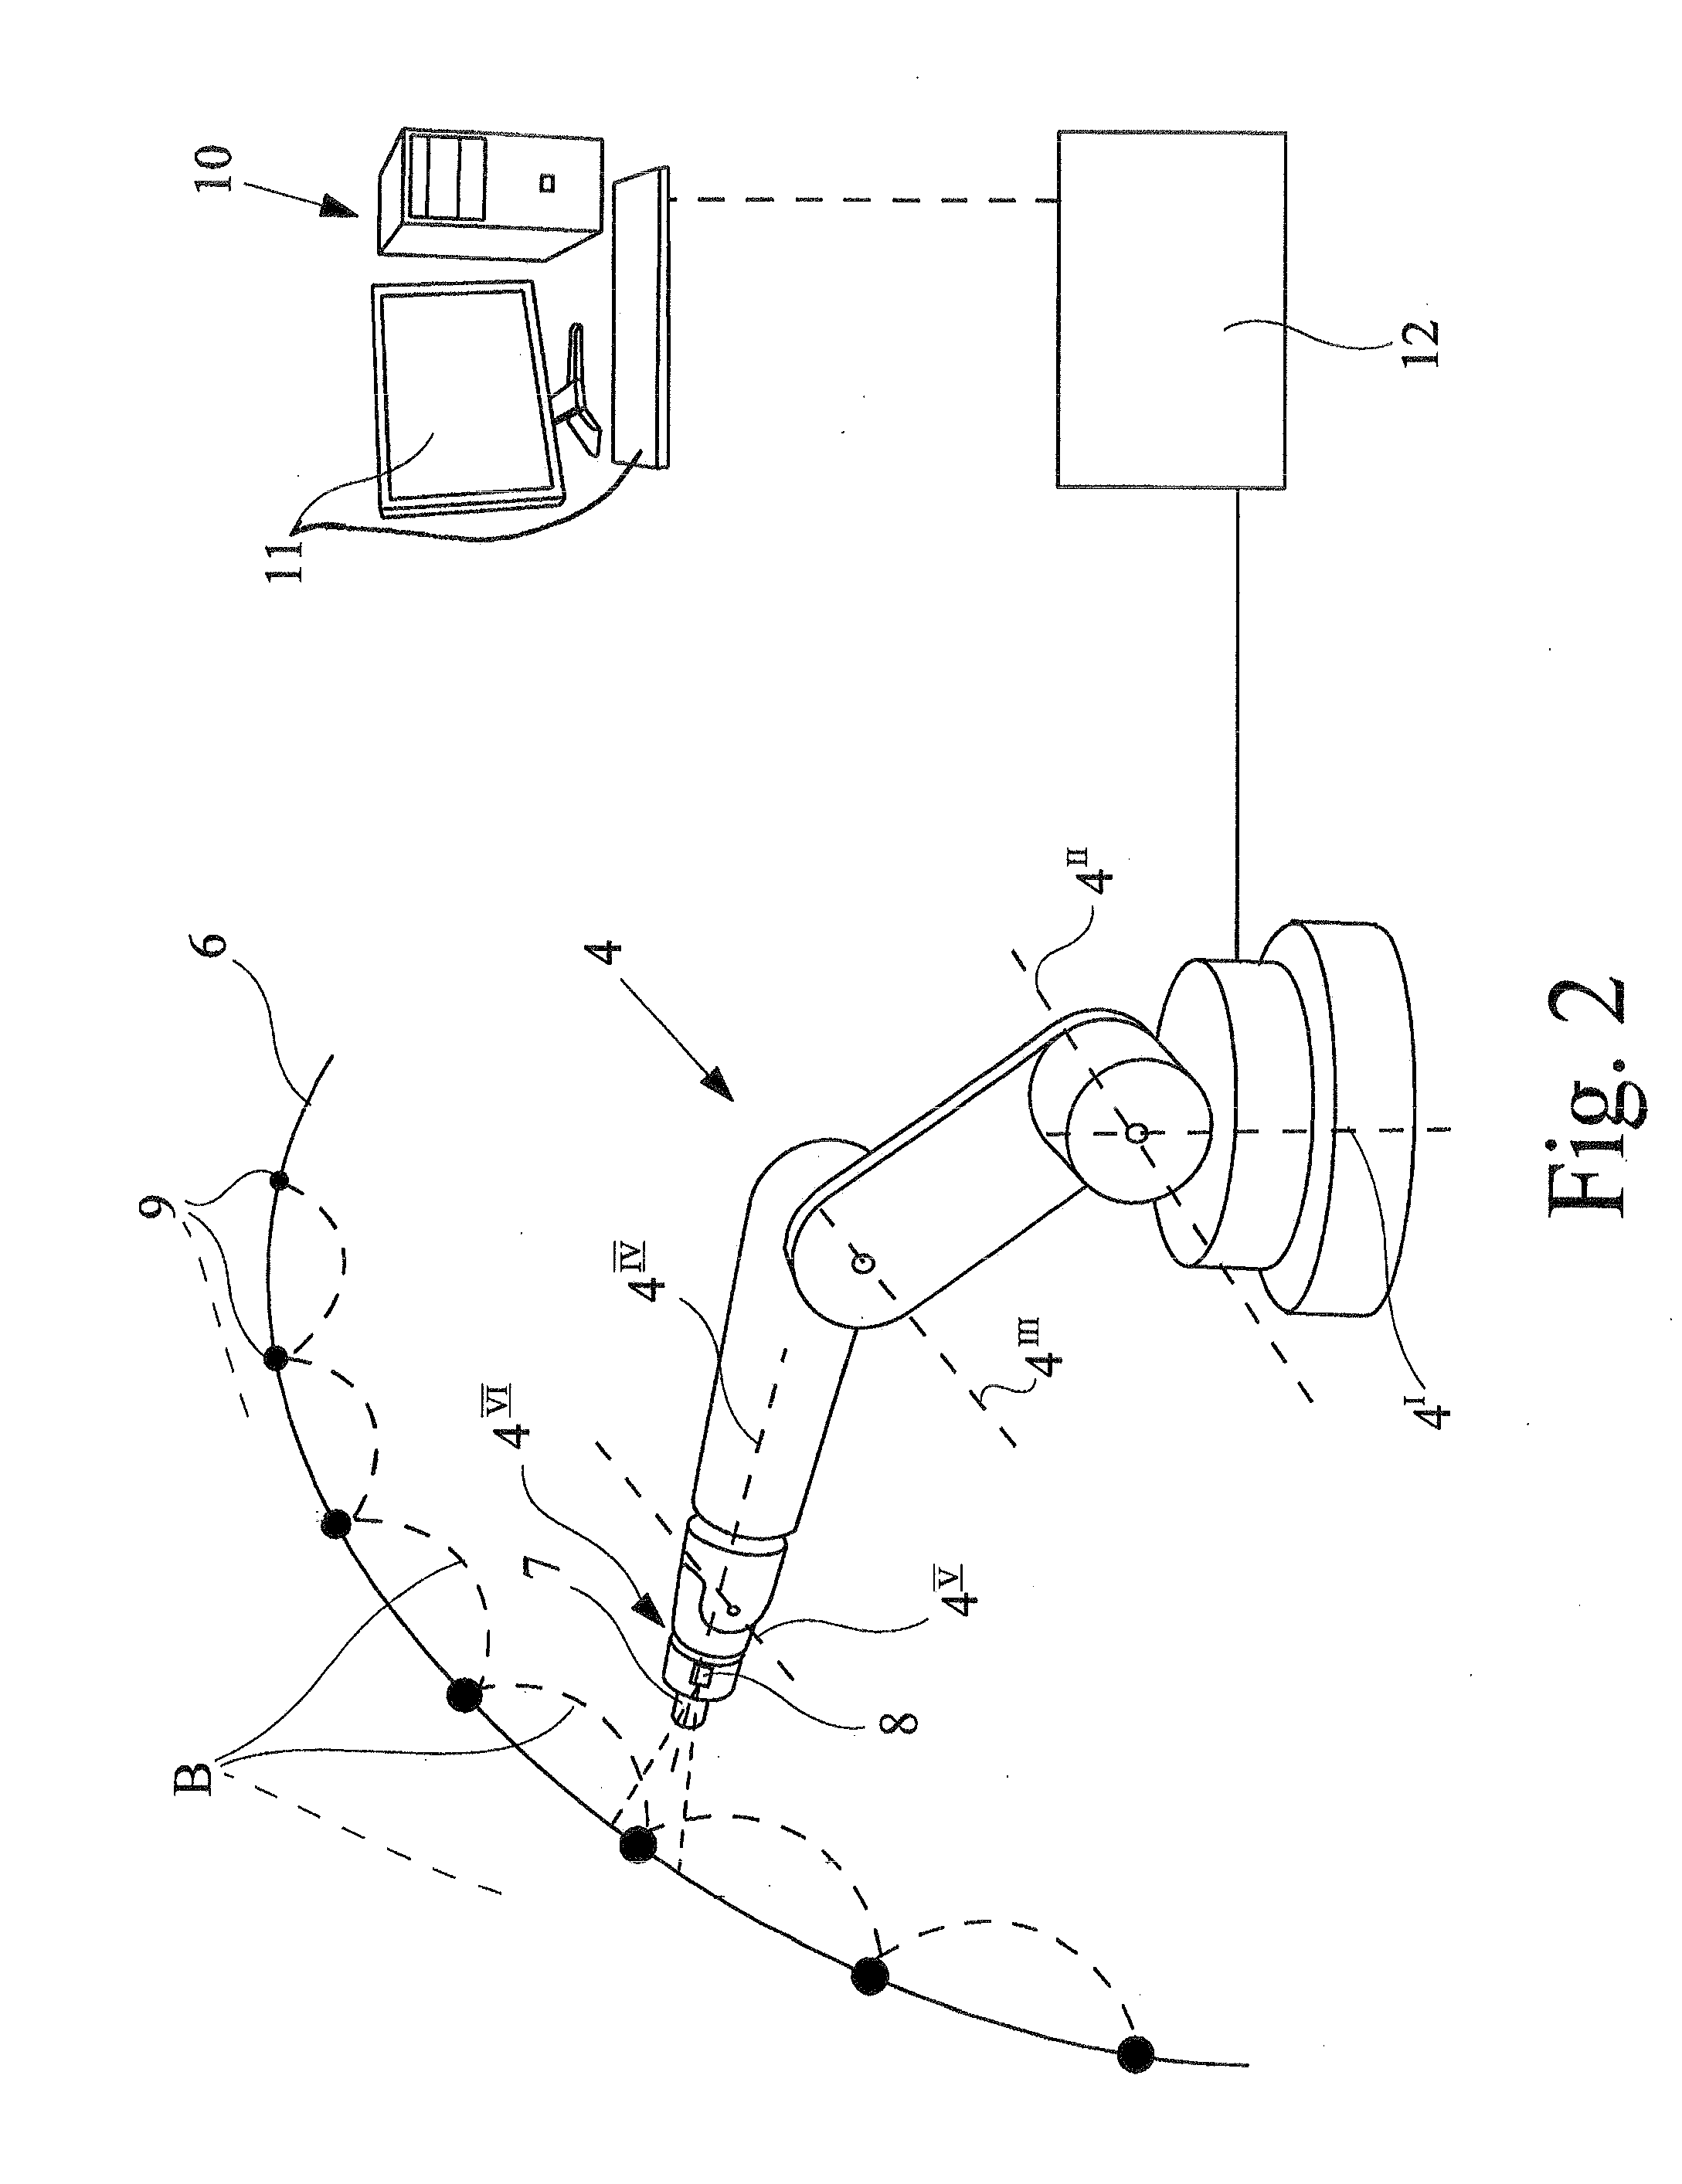 Method for offline programming of an nc-controlled manipulator